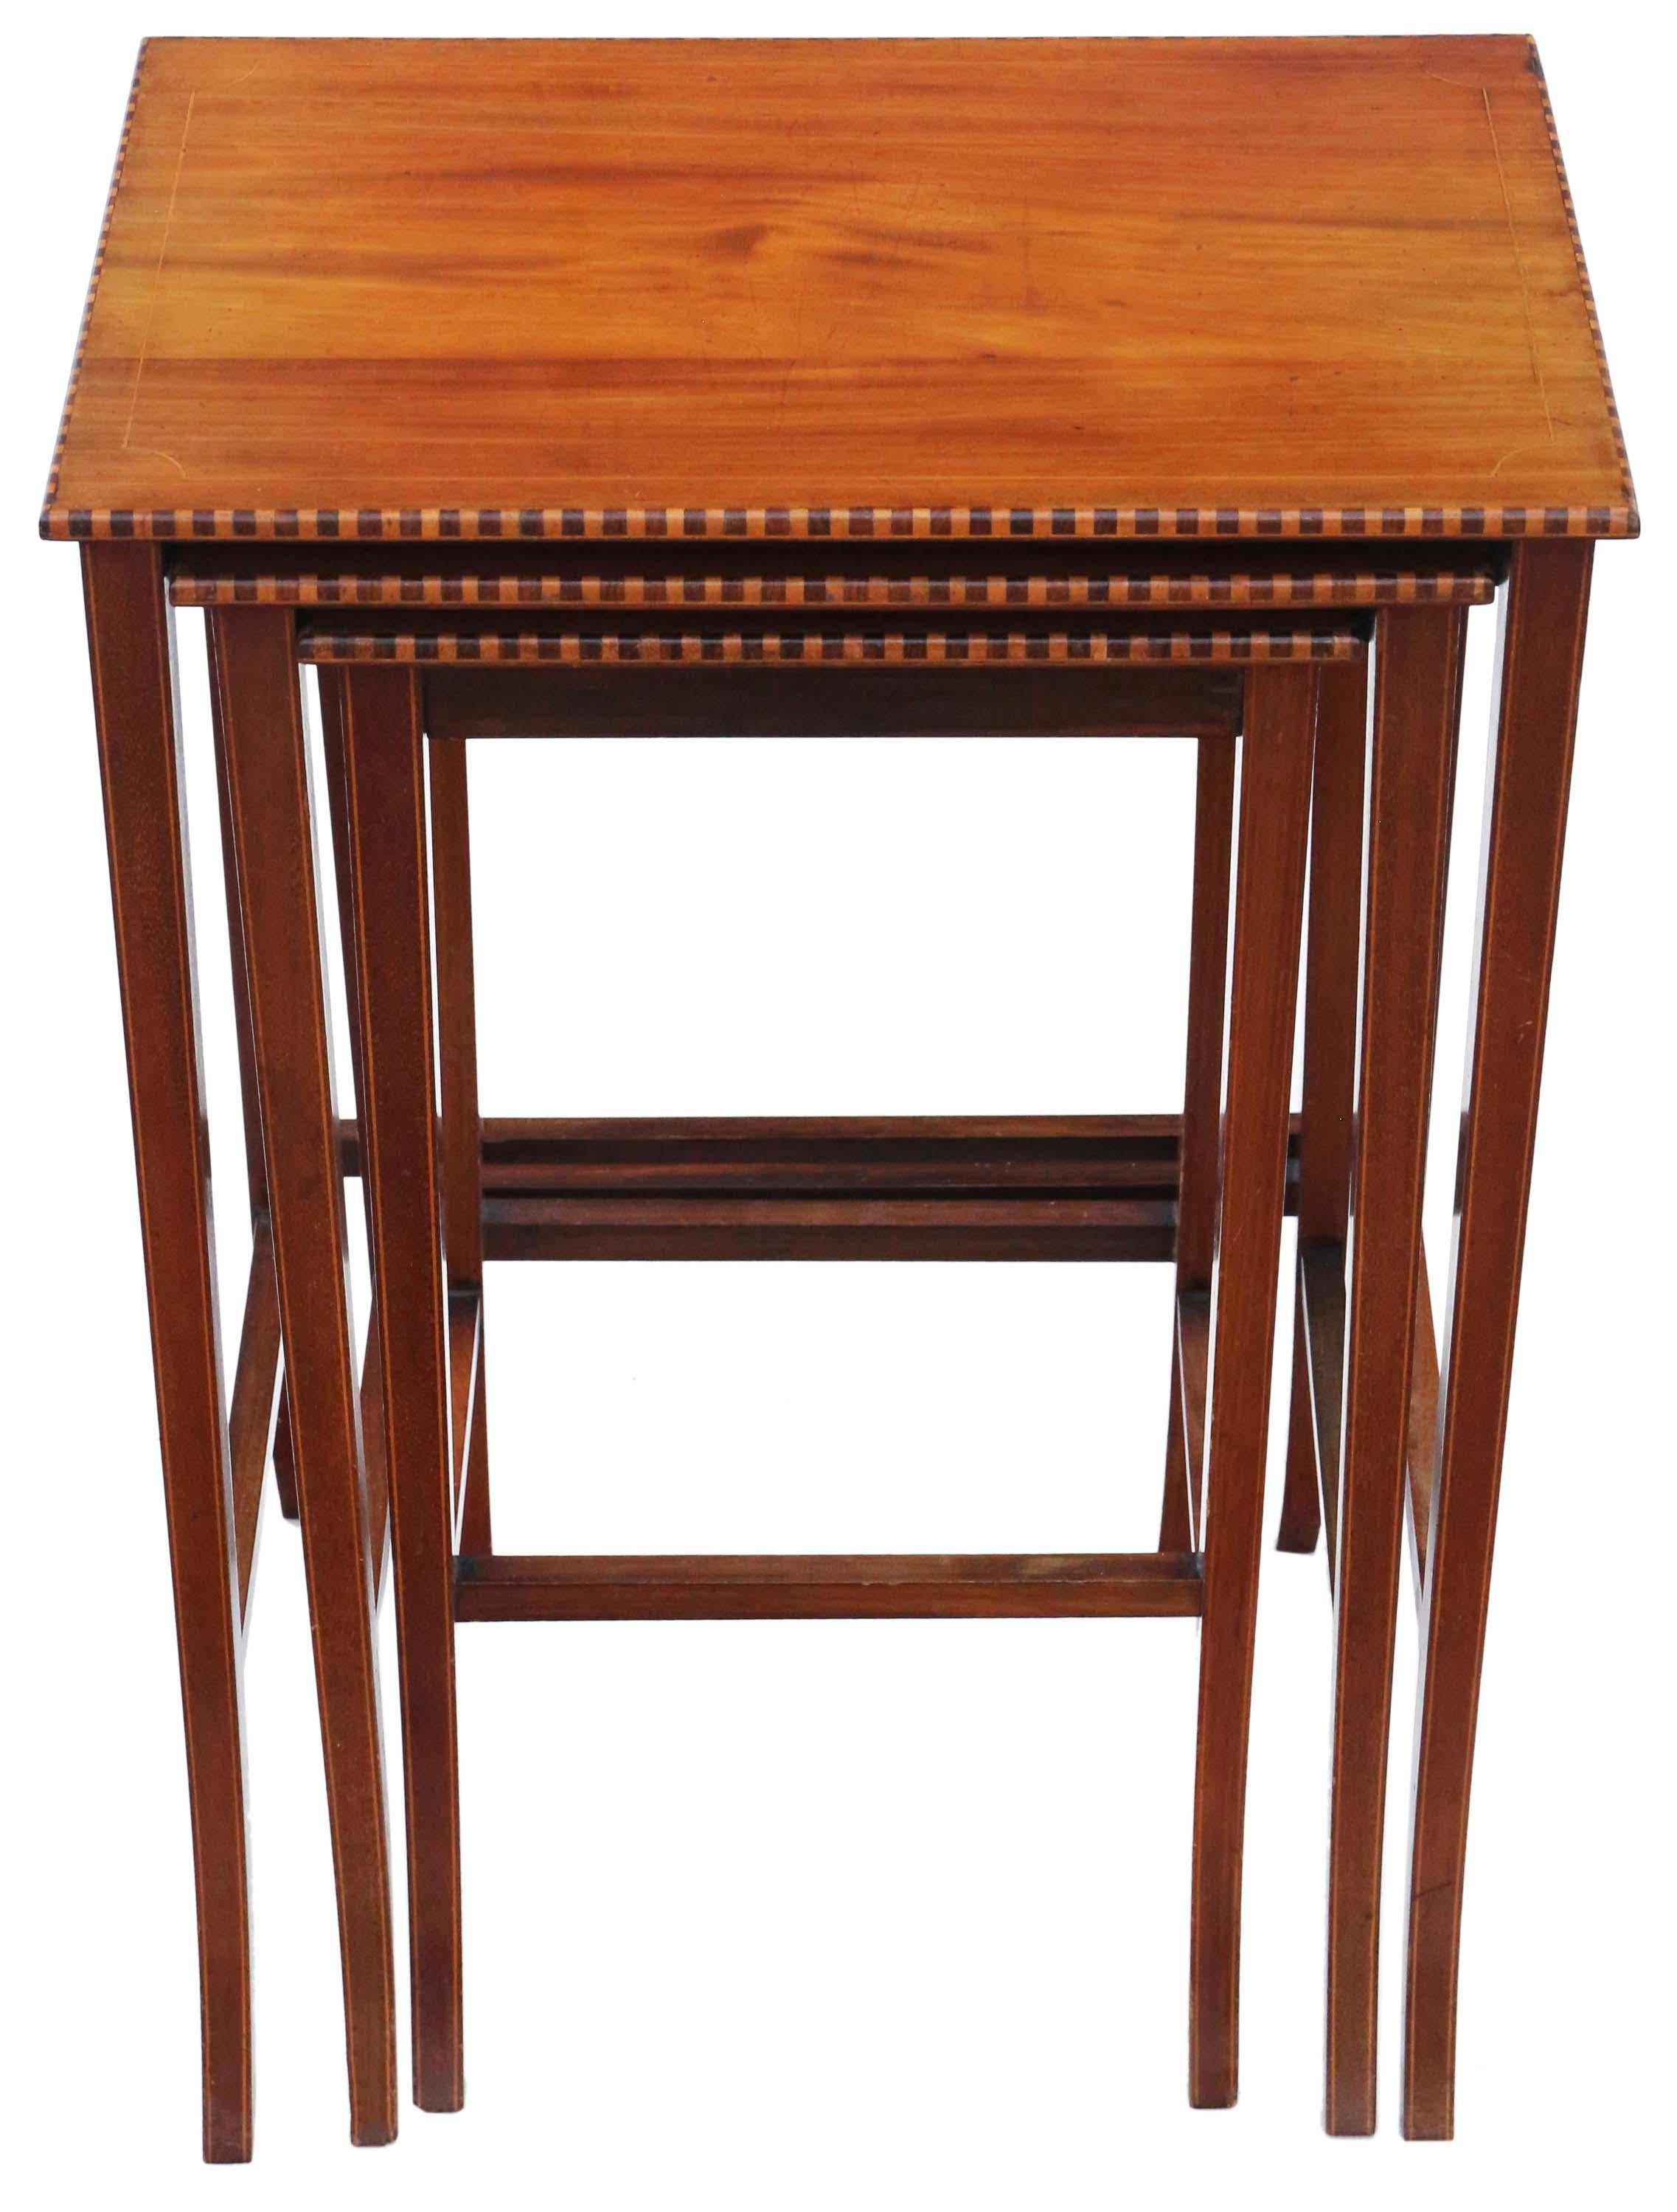 Antique fine quality mahogany nest of 3 Edwardian tables C1905.
 
Very attractive, with lovely proportions and styling. Attractive decoration to edge / perimeter.
 
No loose joints or woodworm.
Good age, colour and patina.

Overall maximum